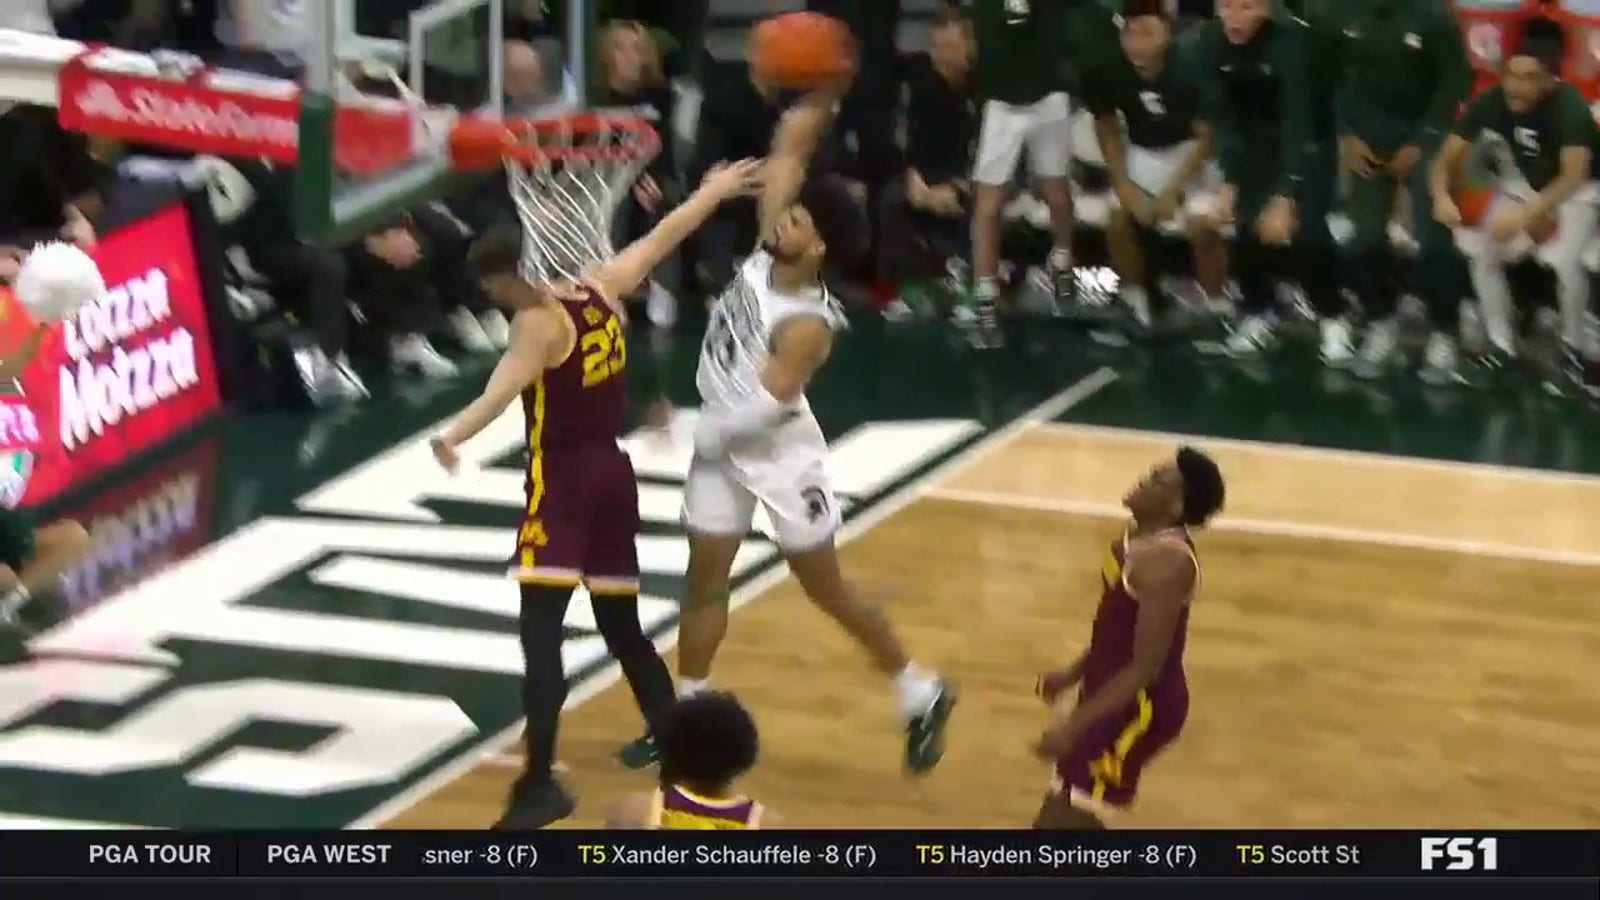 Michigan State's Malik Hall throws down a MONSTER one-handed poster dunk against Minnesota